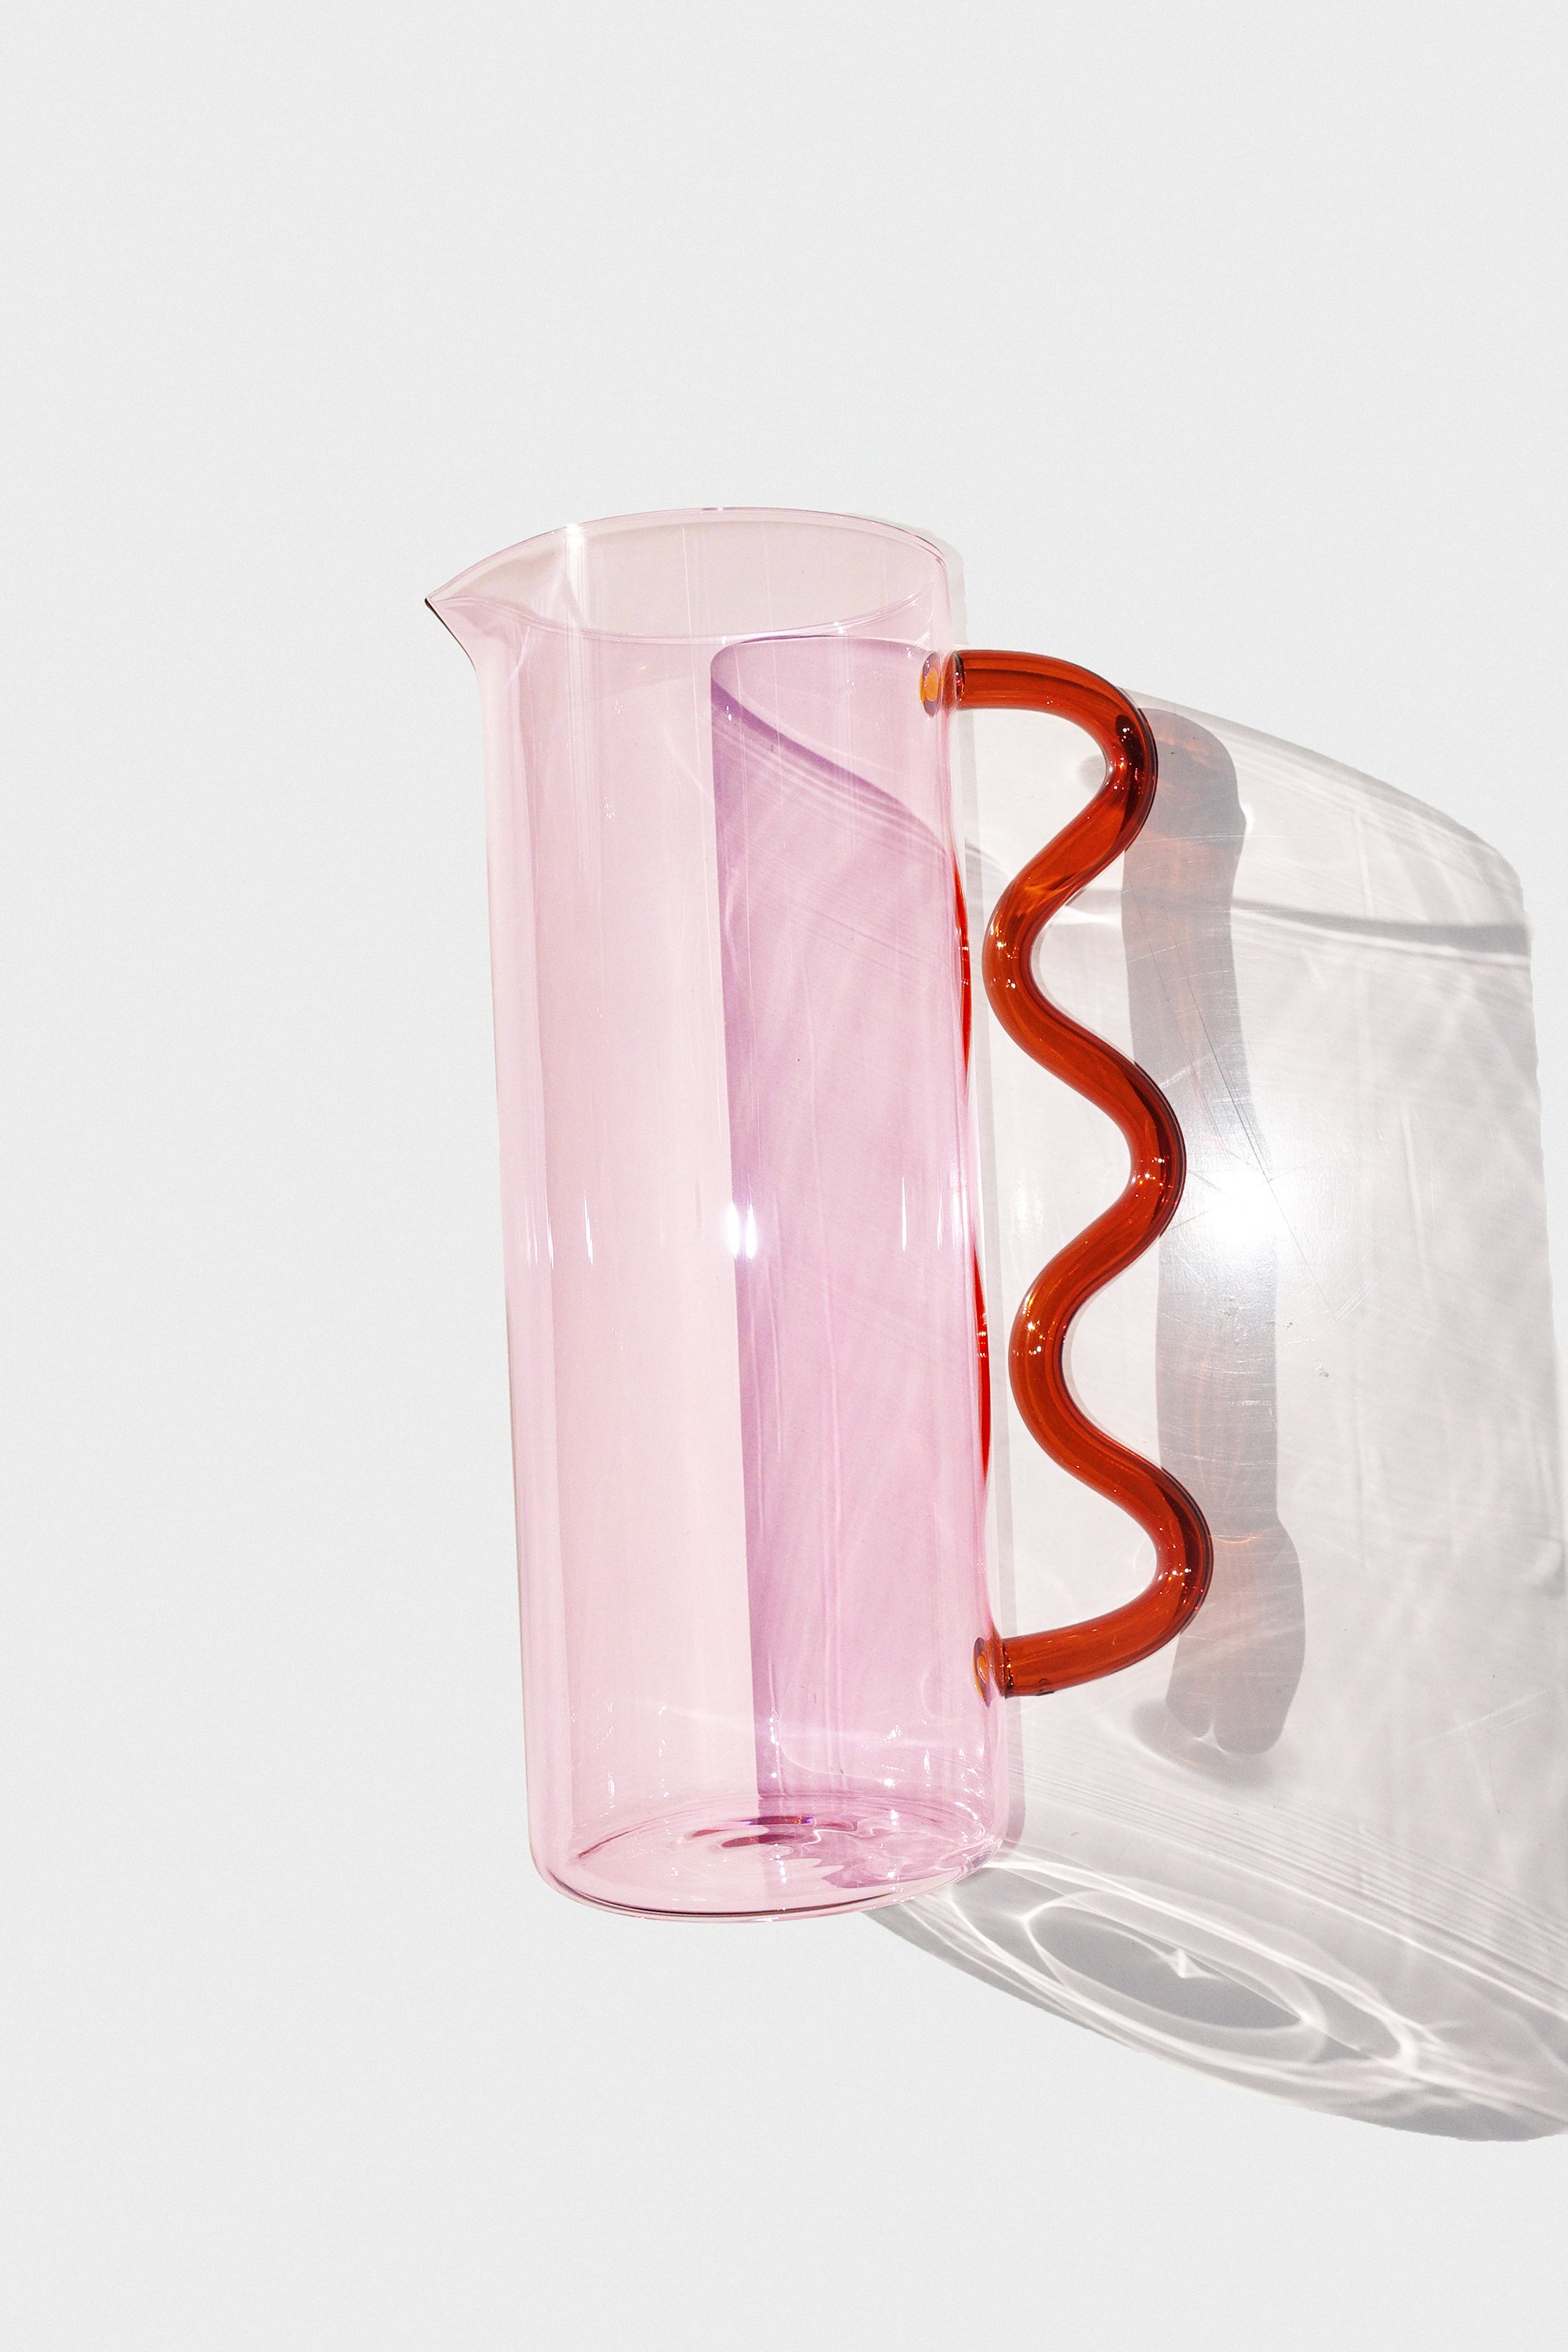 Wave Pitcher in Pink & Amber by Sophie Lou Jacobsen